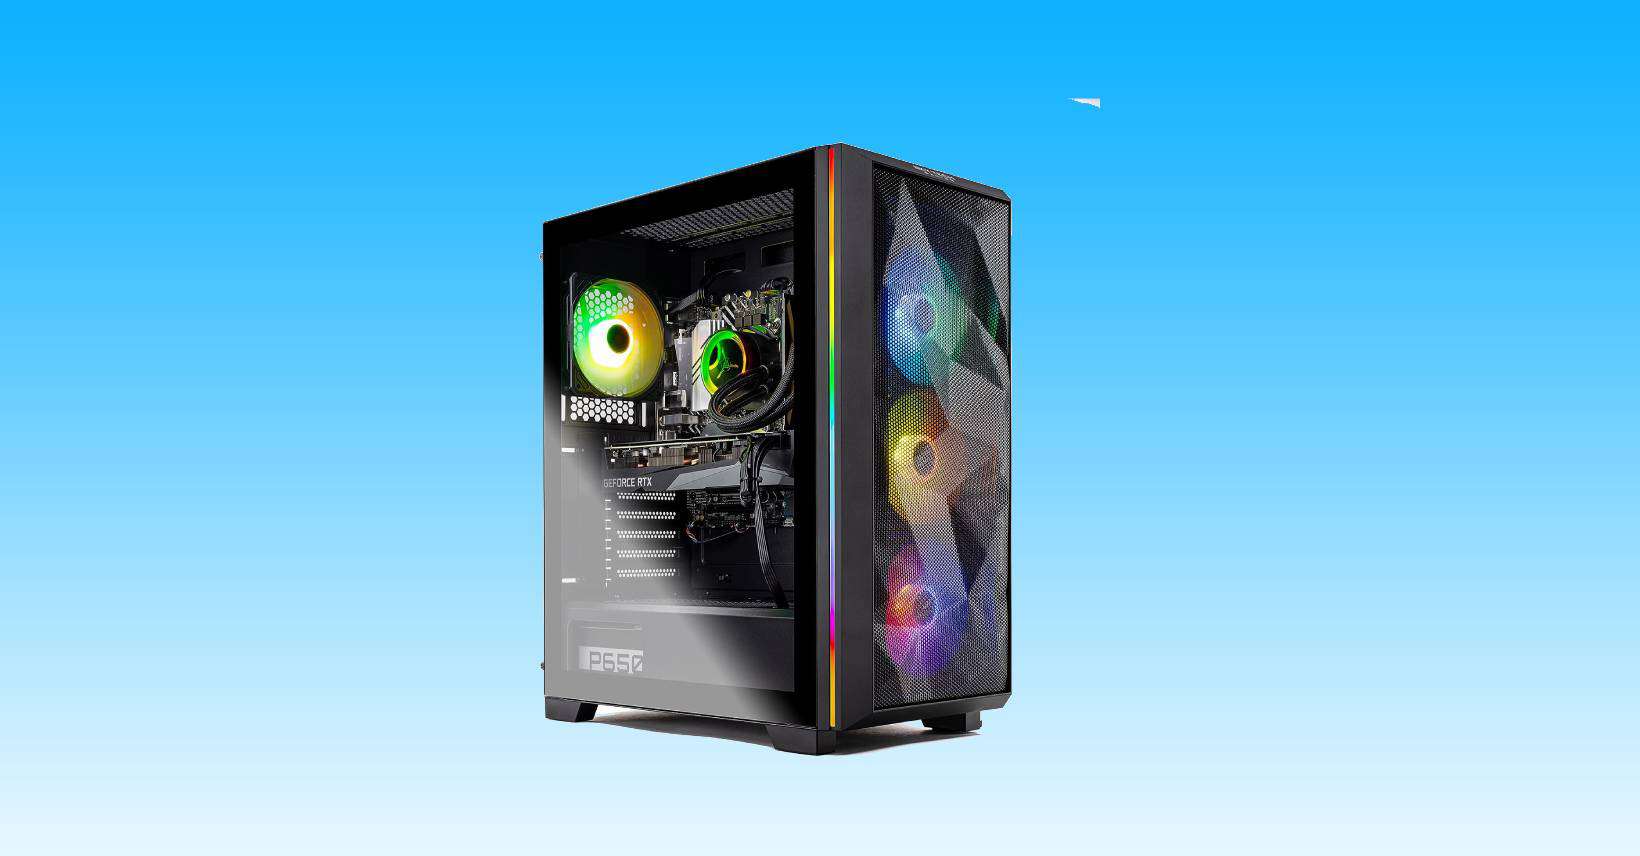 Skytech Chronos RTX 3070 gaming PC just took a big price cut in